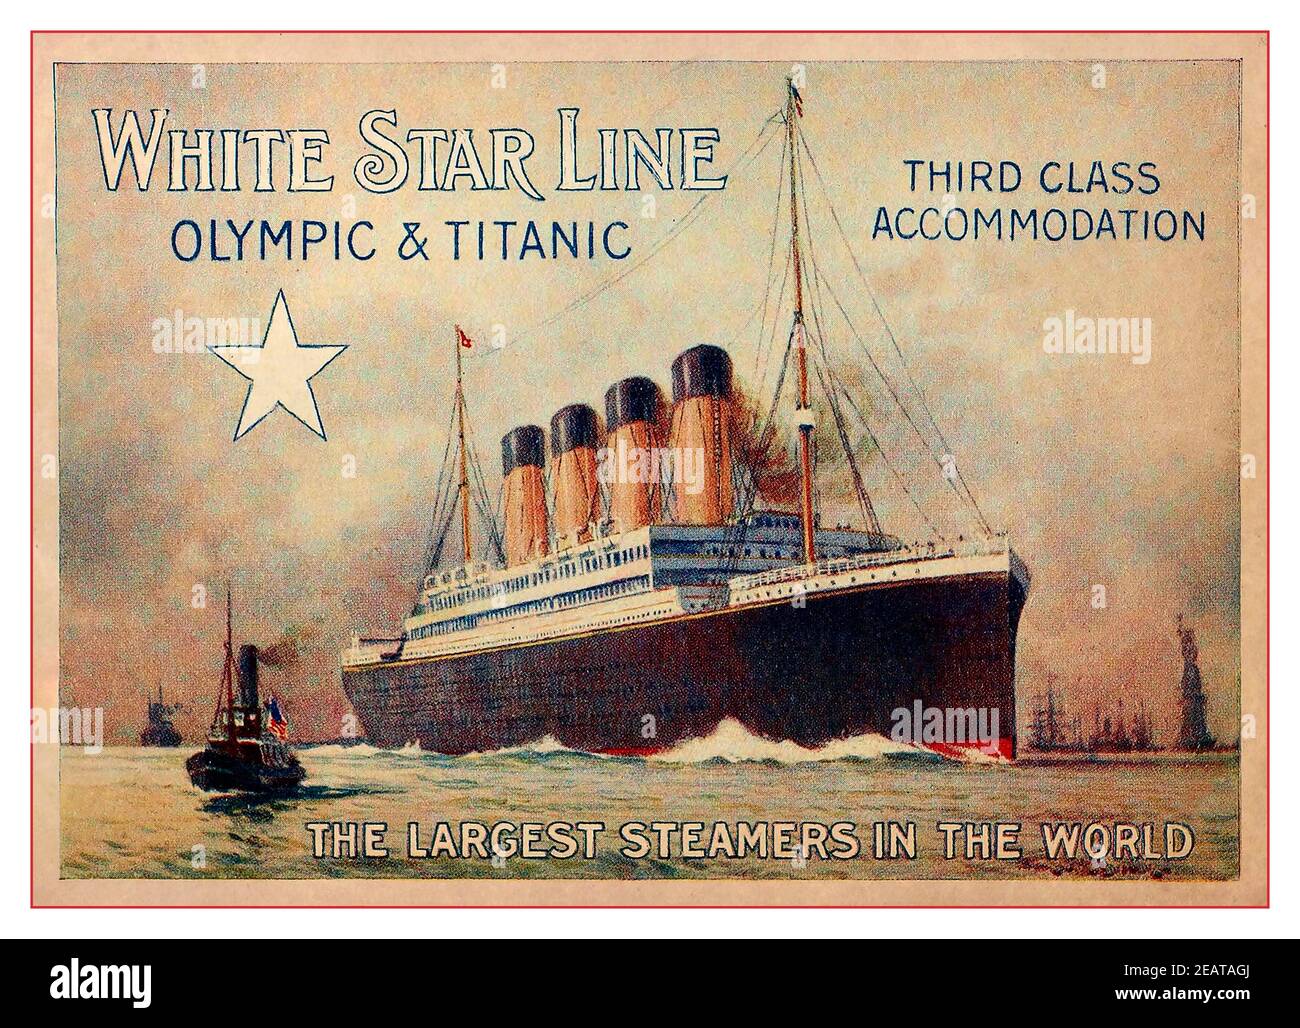 TITANIC & OLYMPIC 1900's Brochure Advertisement colour page by White Star Line offering Third Class Accommodation in The Largest Steamers In The World 1910 Stock Photo